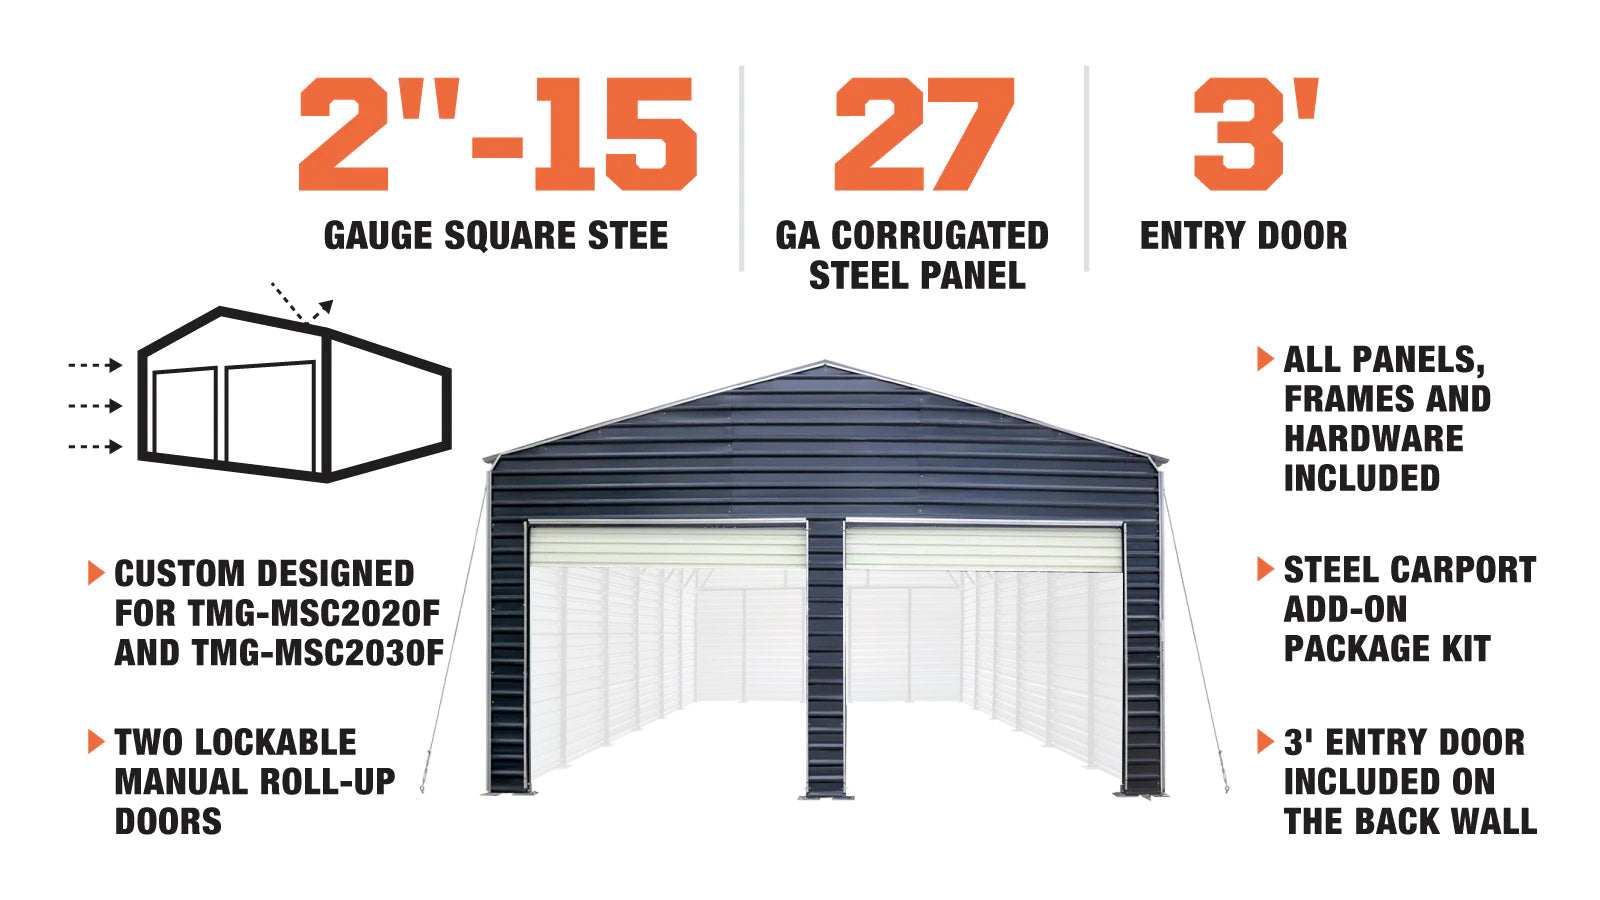 TMG Industrial Metal Shed Carport Add-On Package Kit For TMG-MSC2020F And TMG-MSC2030F , Front Wall w/Roll Up Doors & Back Wall, TMG-MSC20-RD12-description-image